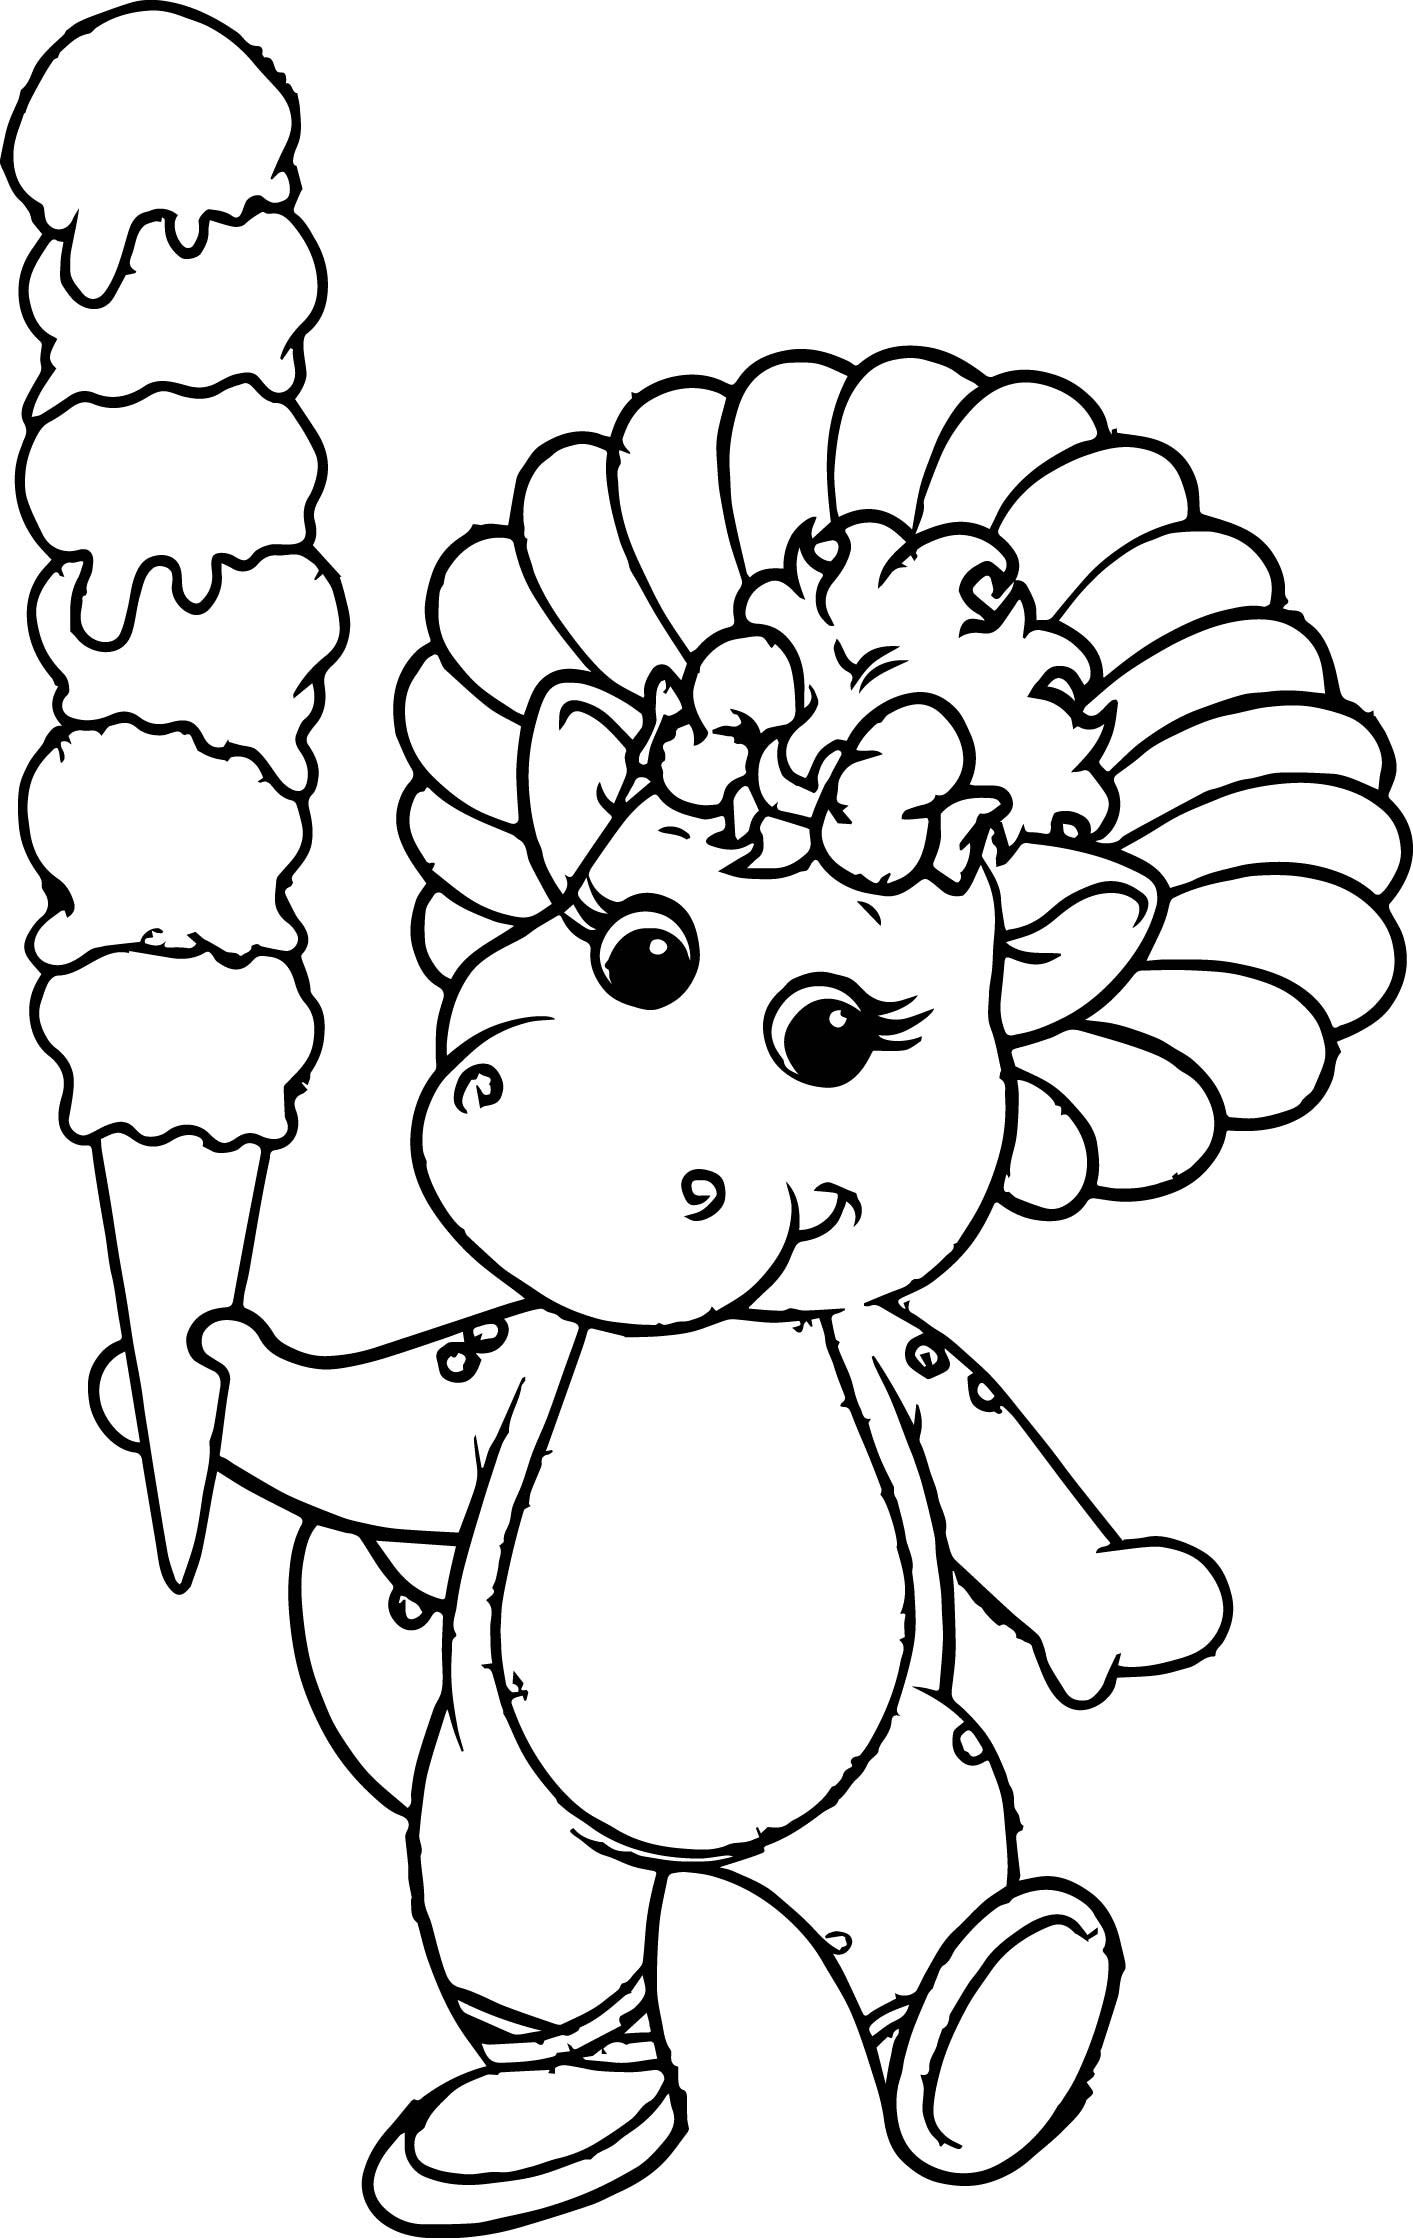 Baby Bop Coloring Pages
 Baby Bop And Her Icy Creamy Coloring Page